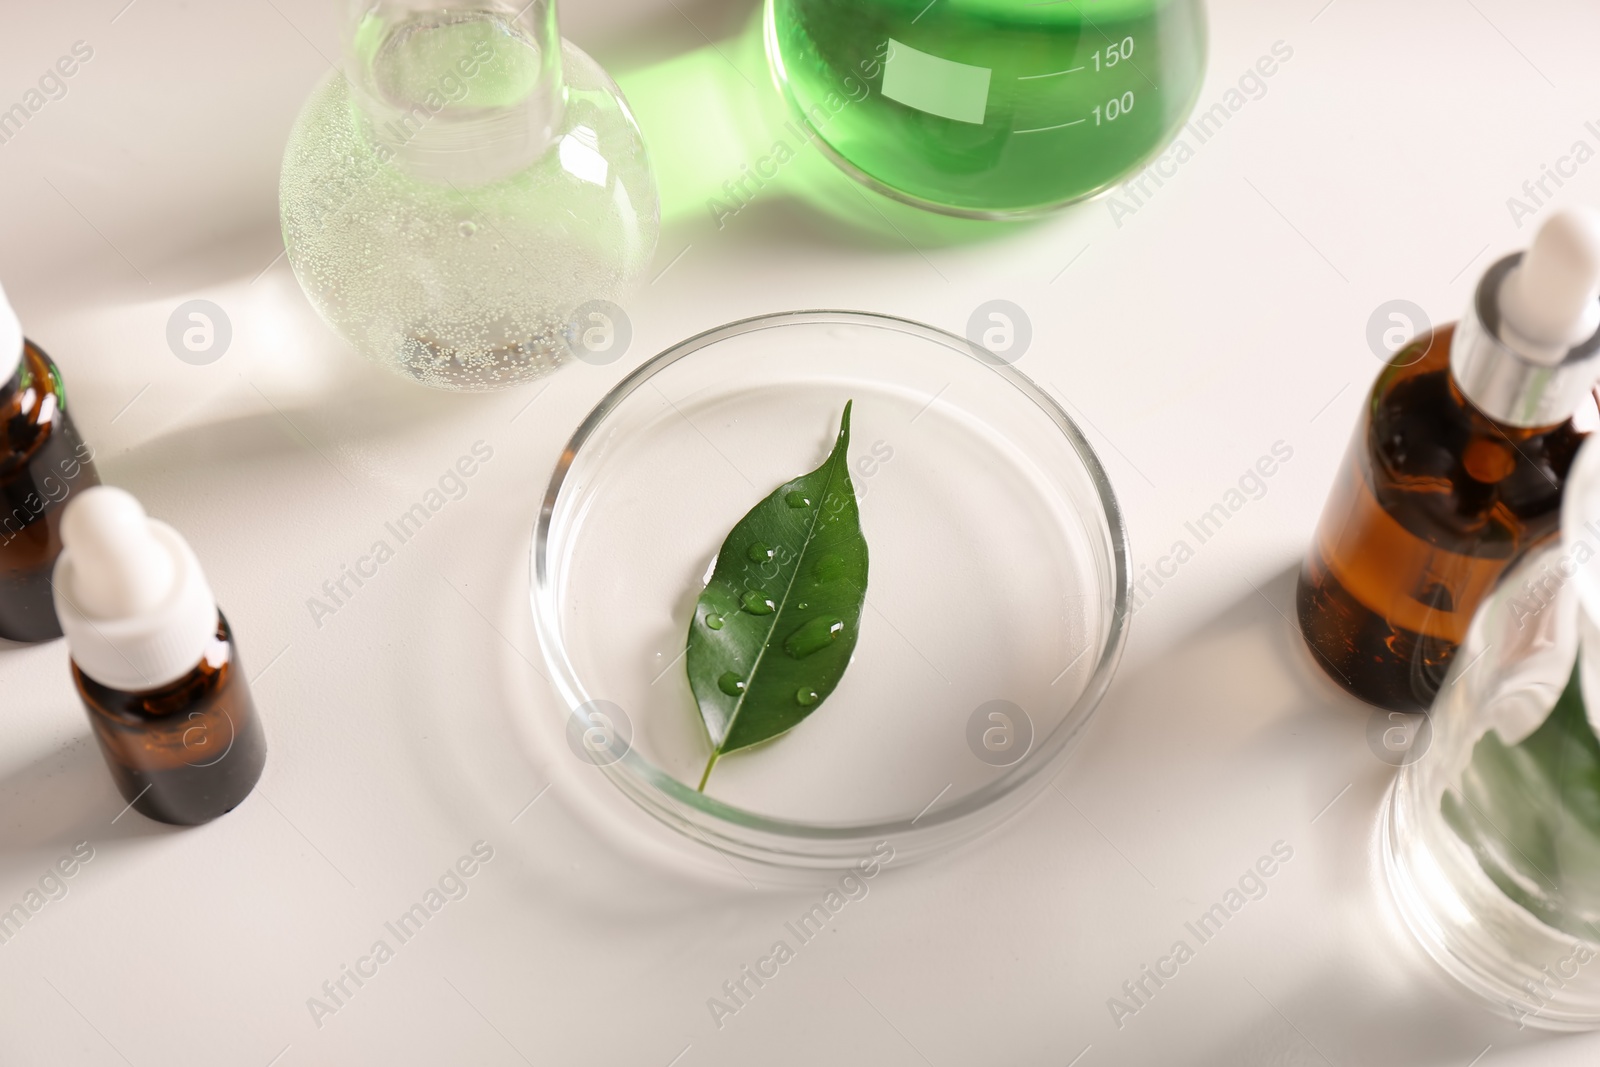 Photo of Skin care products, ingredients and laboratory glassware on white background. Dermatology research